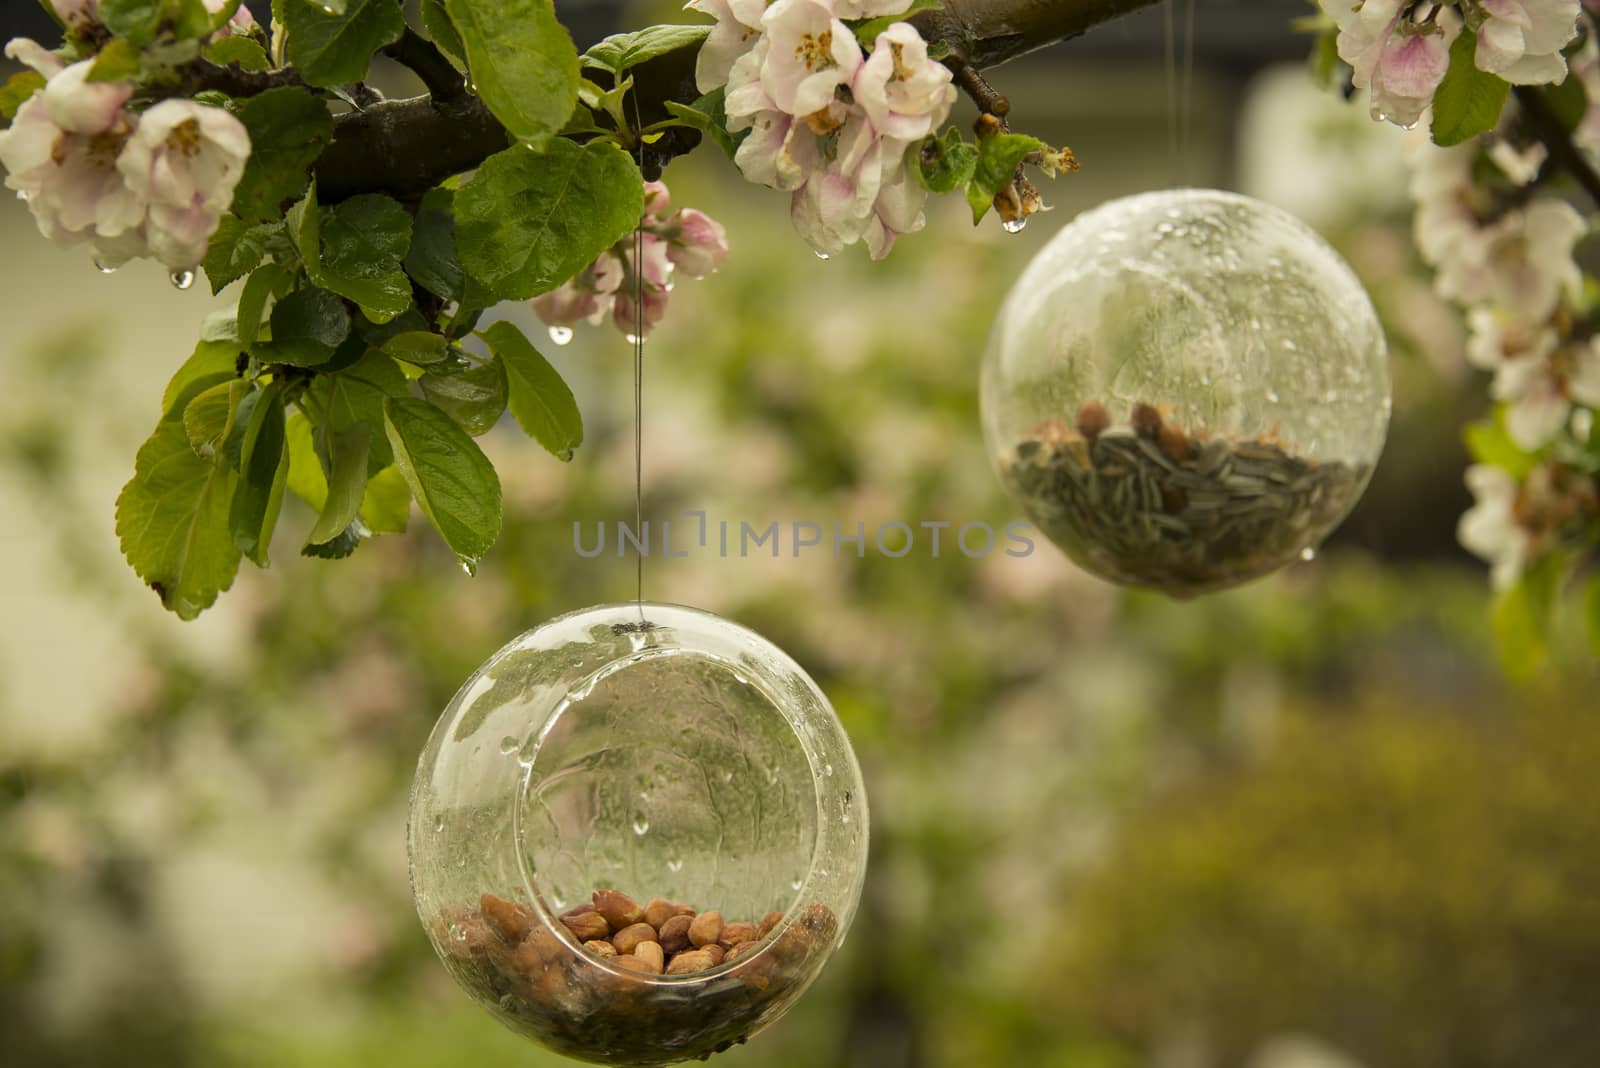 Bird feeders in glass in a blooming apple tree in spring on a rainy day